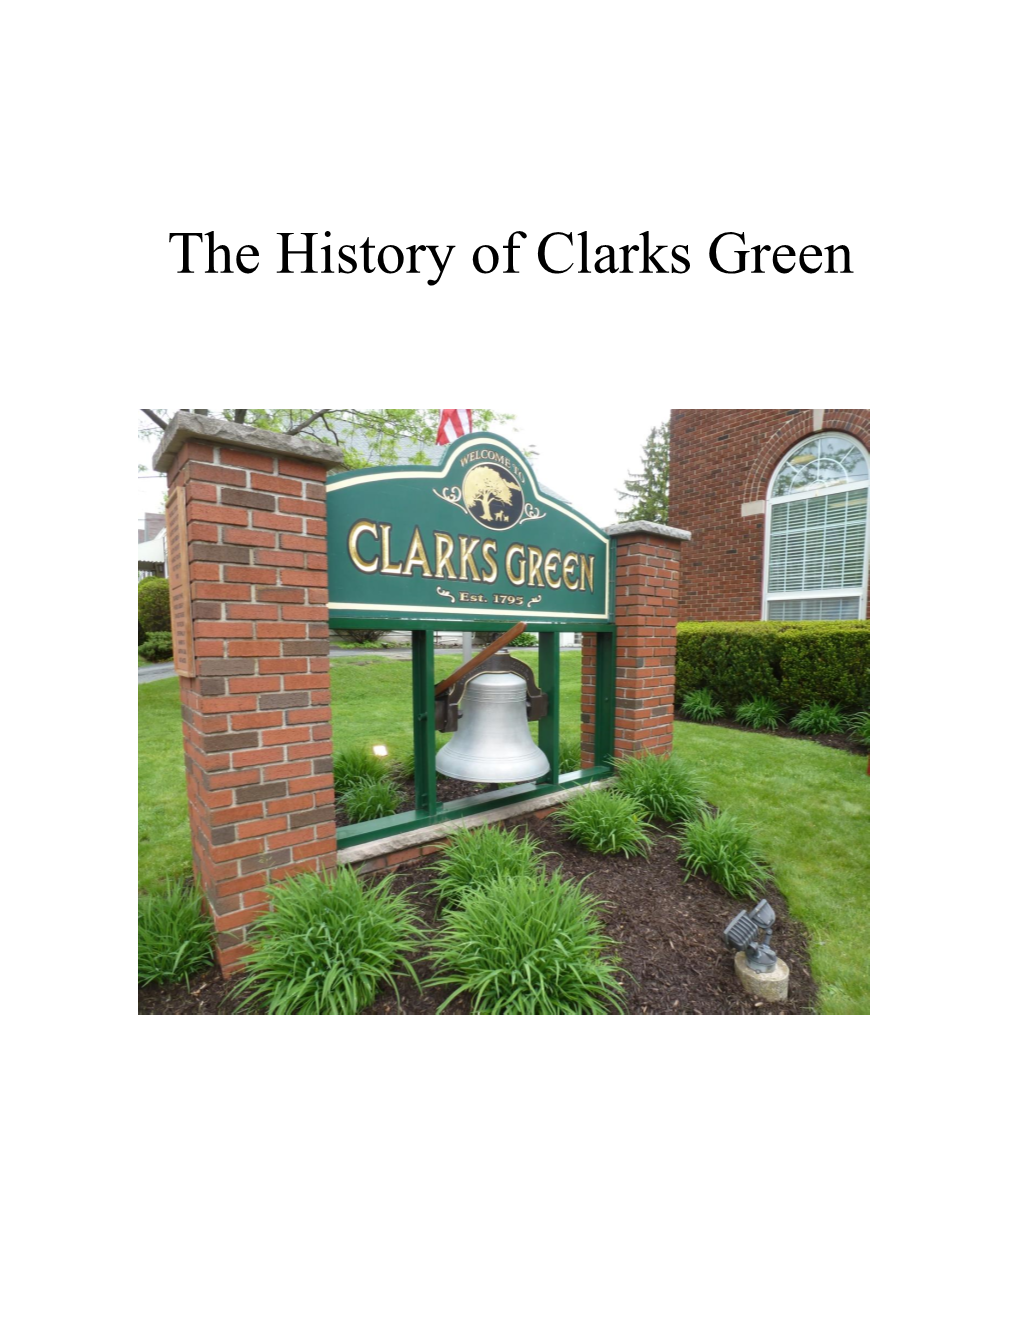 The History of Clarks Green